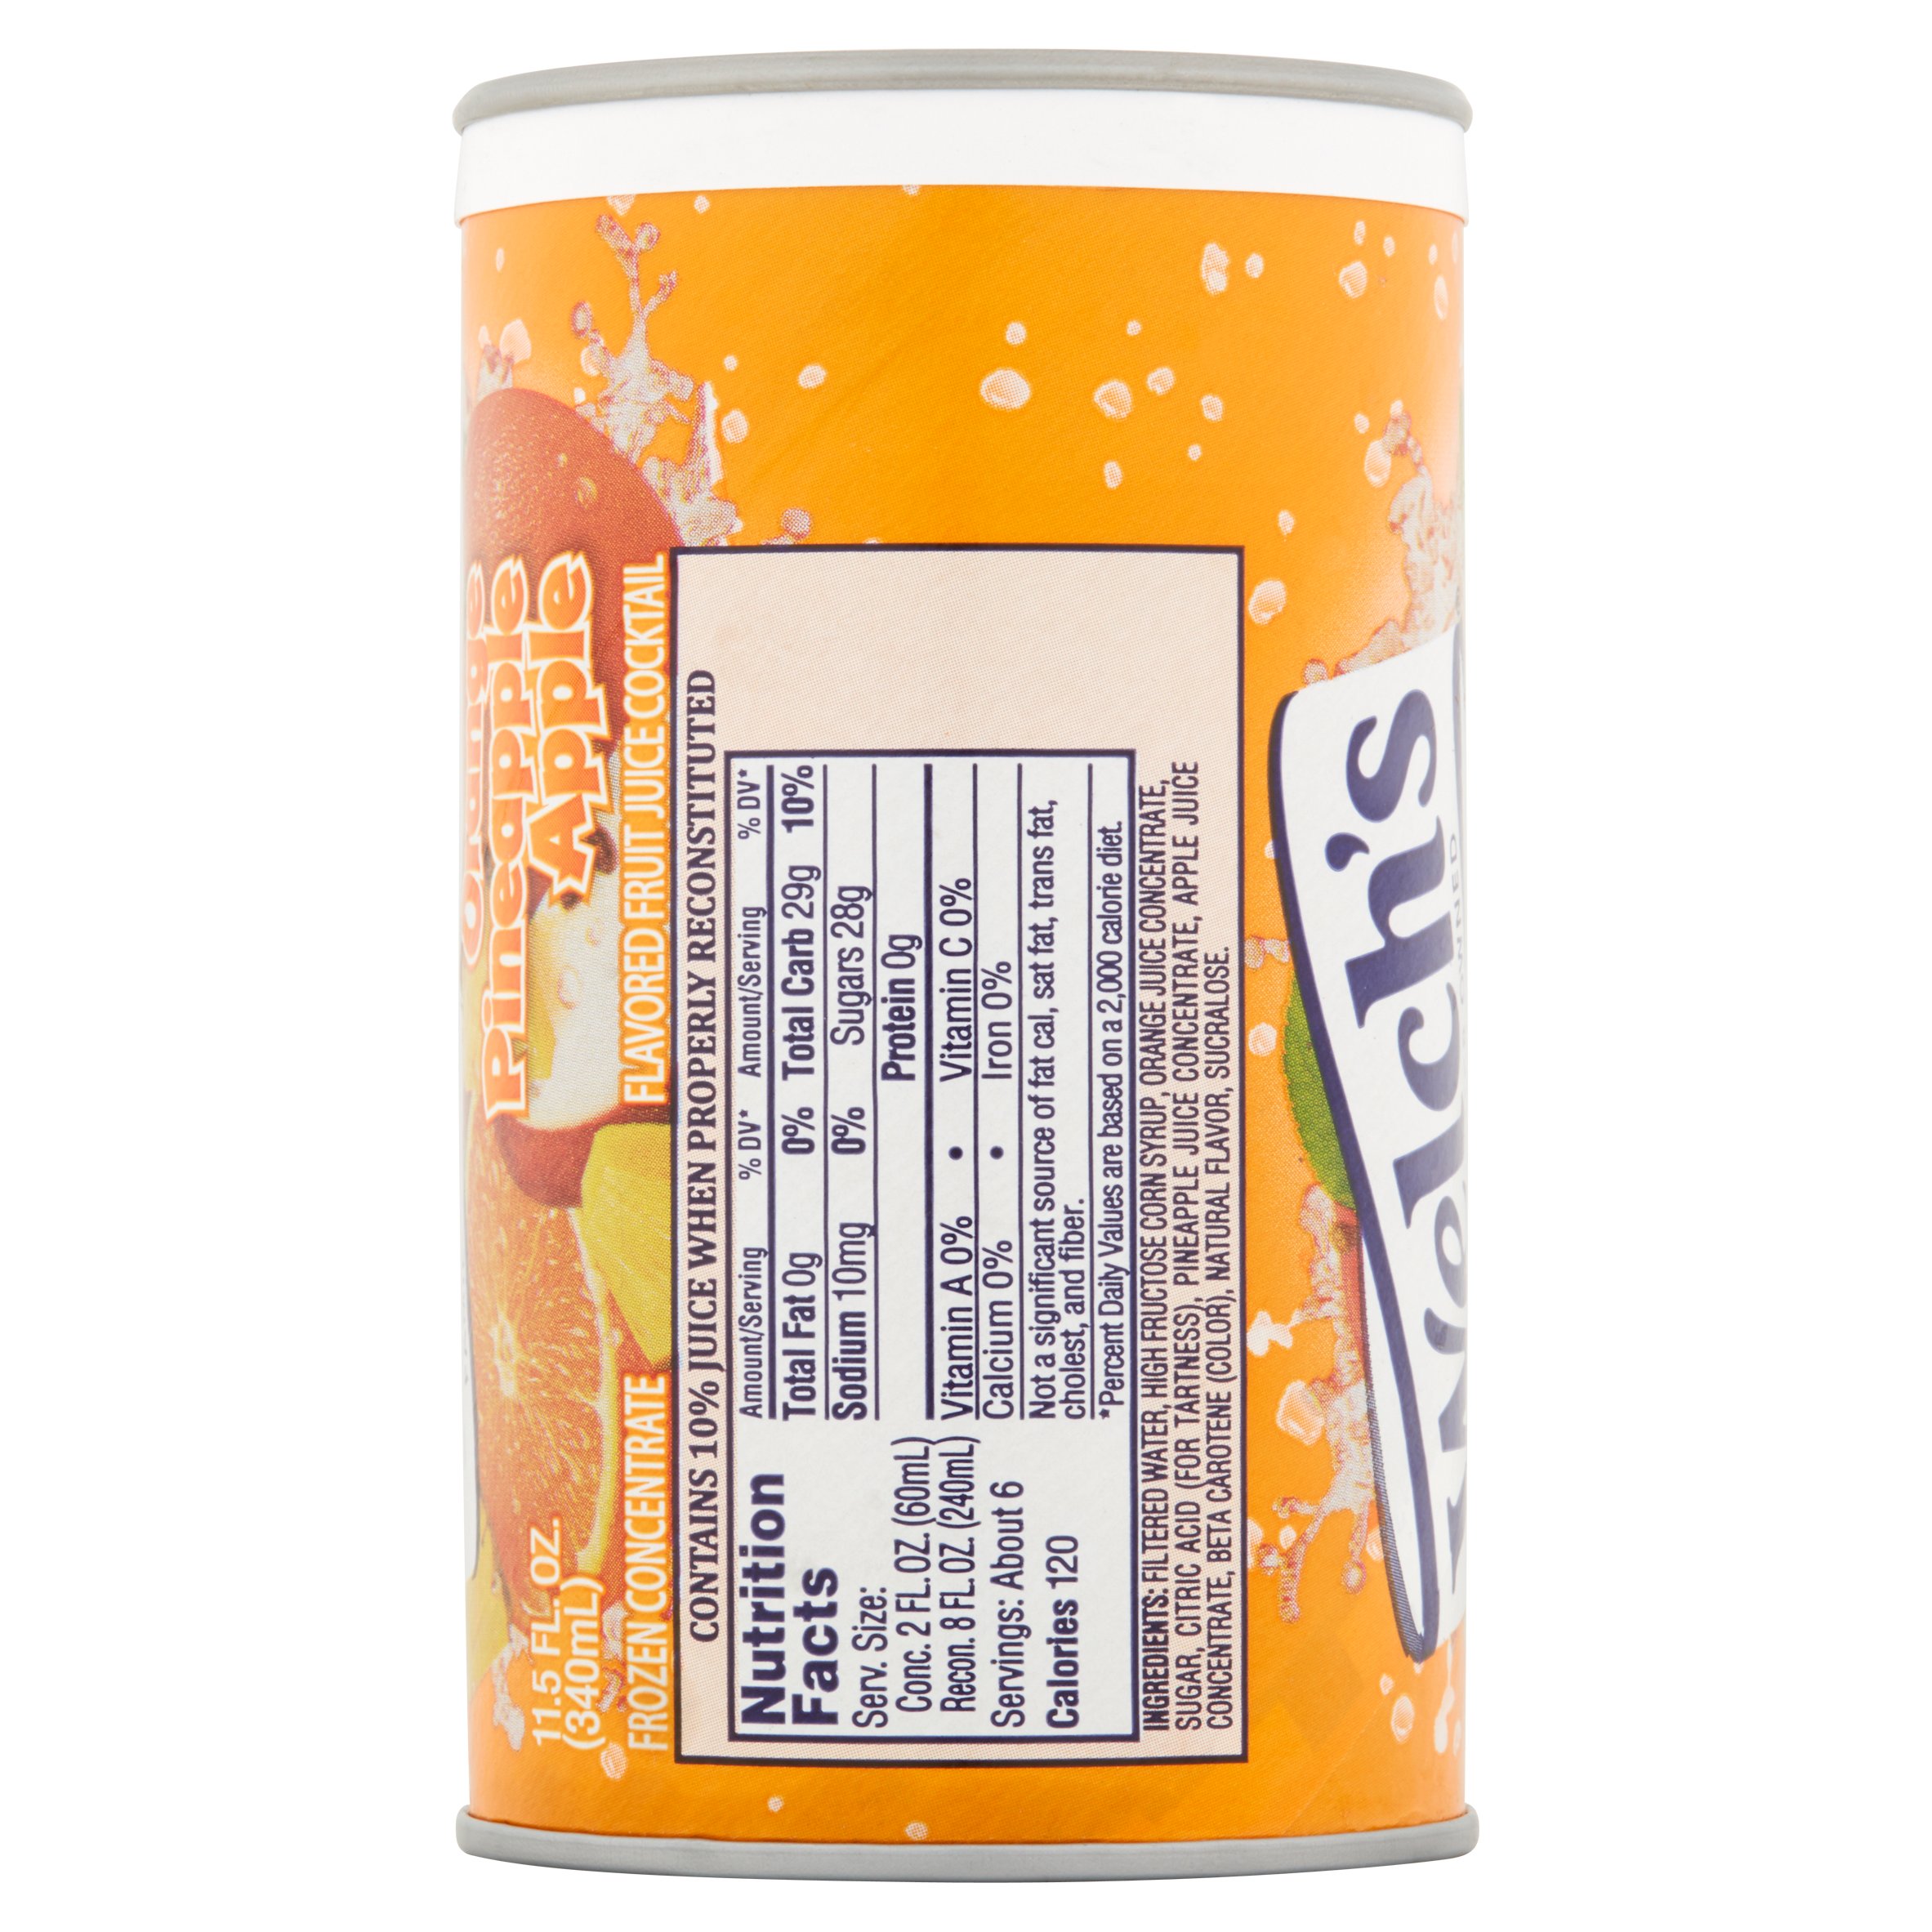 Welch's Orange Pineapple Apple Juice Concentrate, 11.5 oz - image 4 of 4